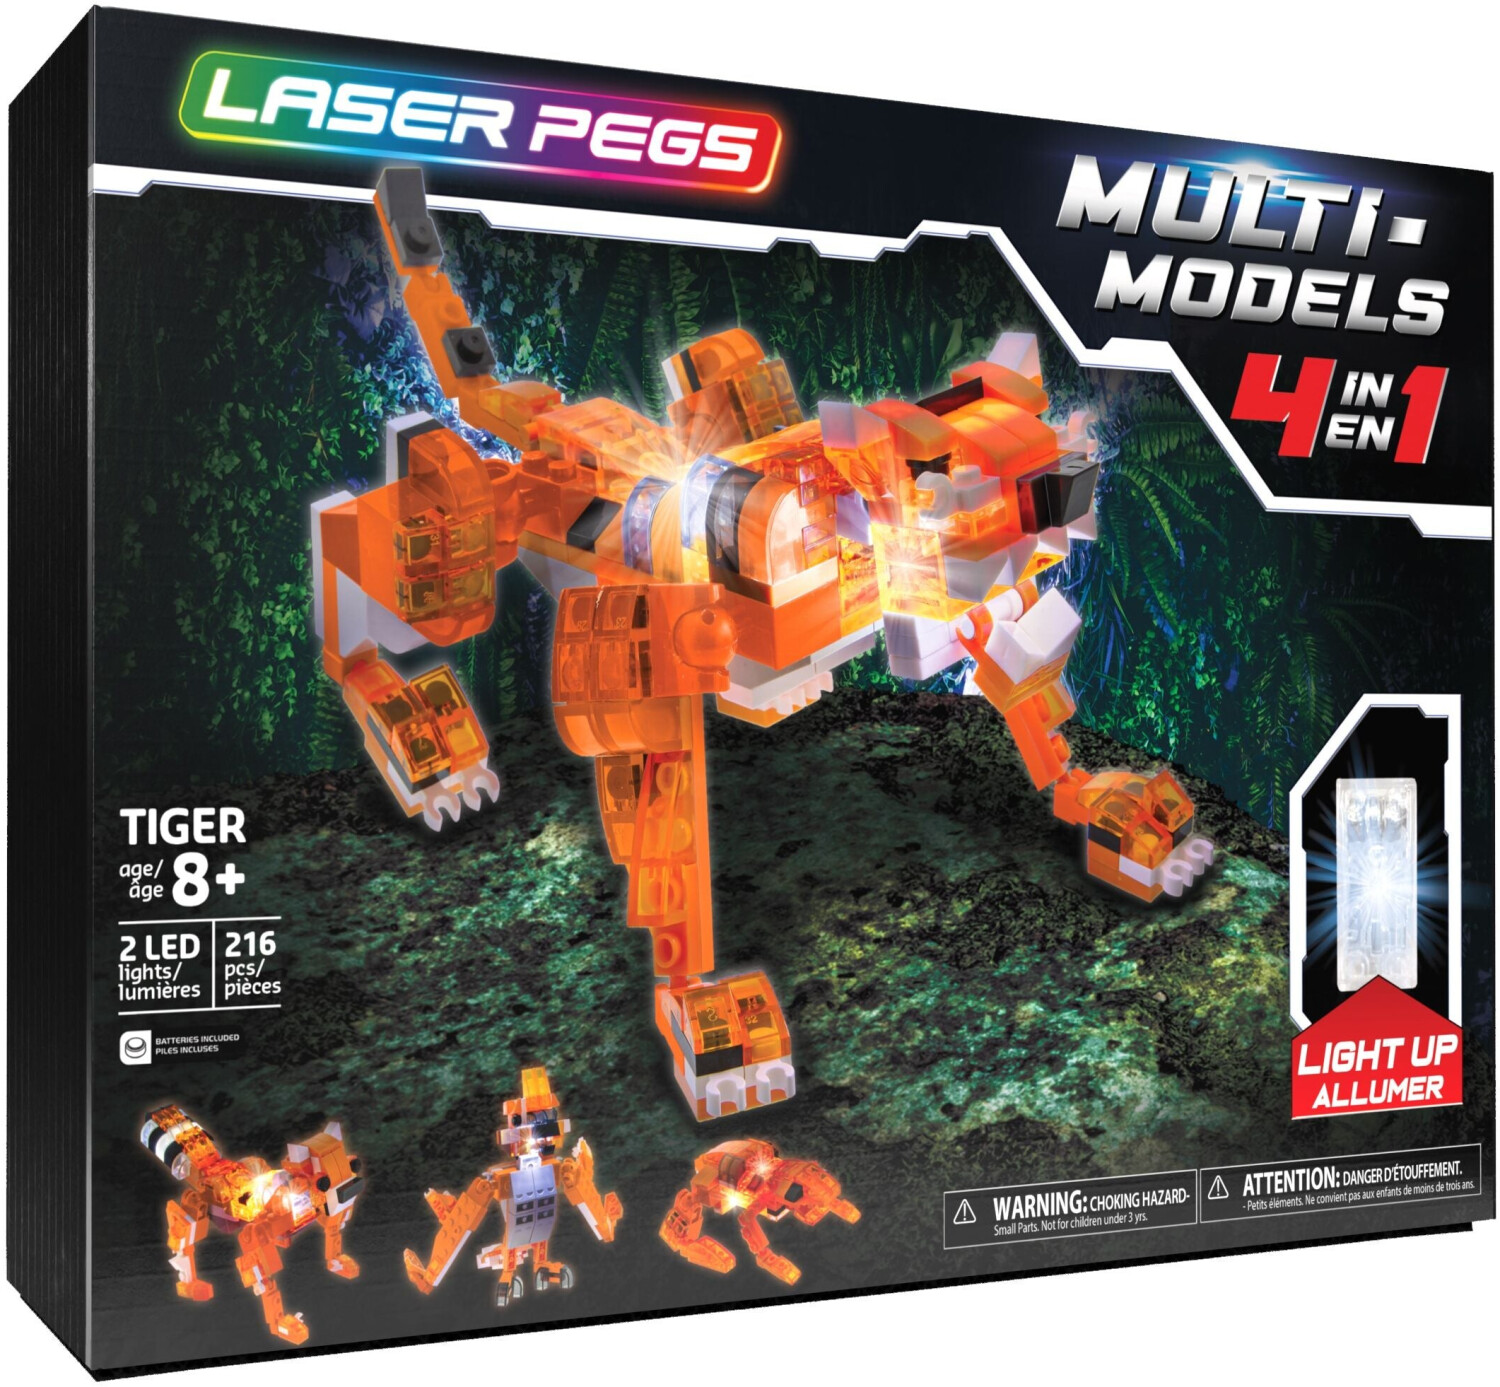 Photos - Construction Toy Laser Pegs 4-in-1 Tiger 